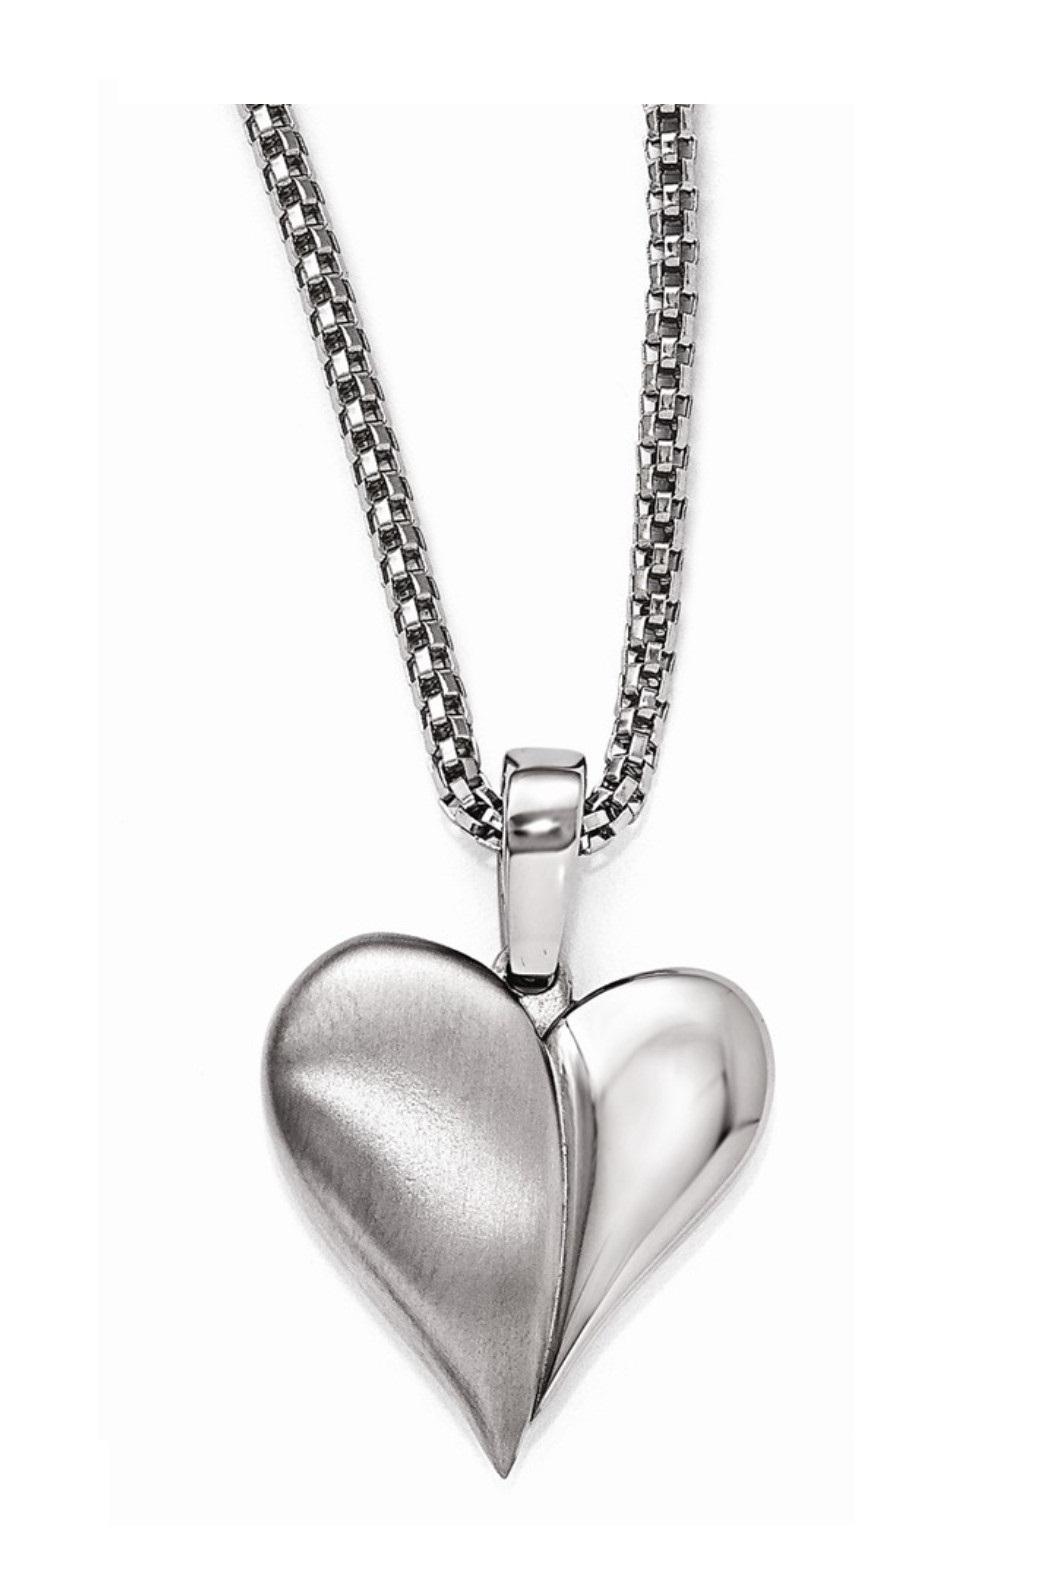 Polished and Brushed Titanium Heart with Sterling Silver 2